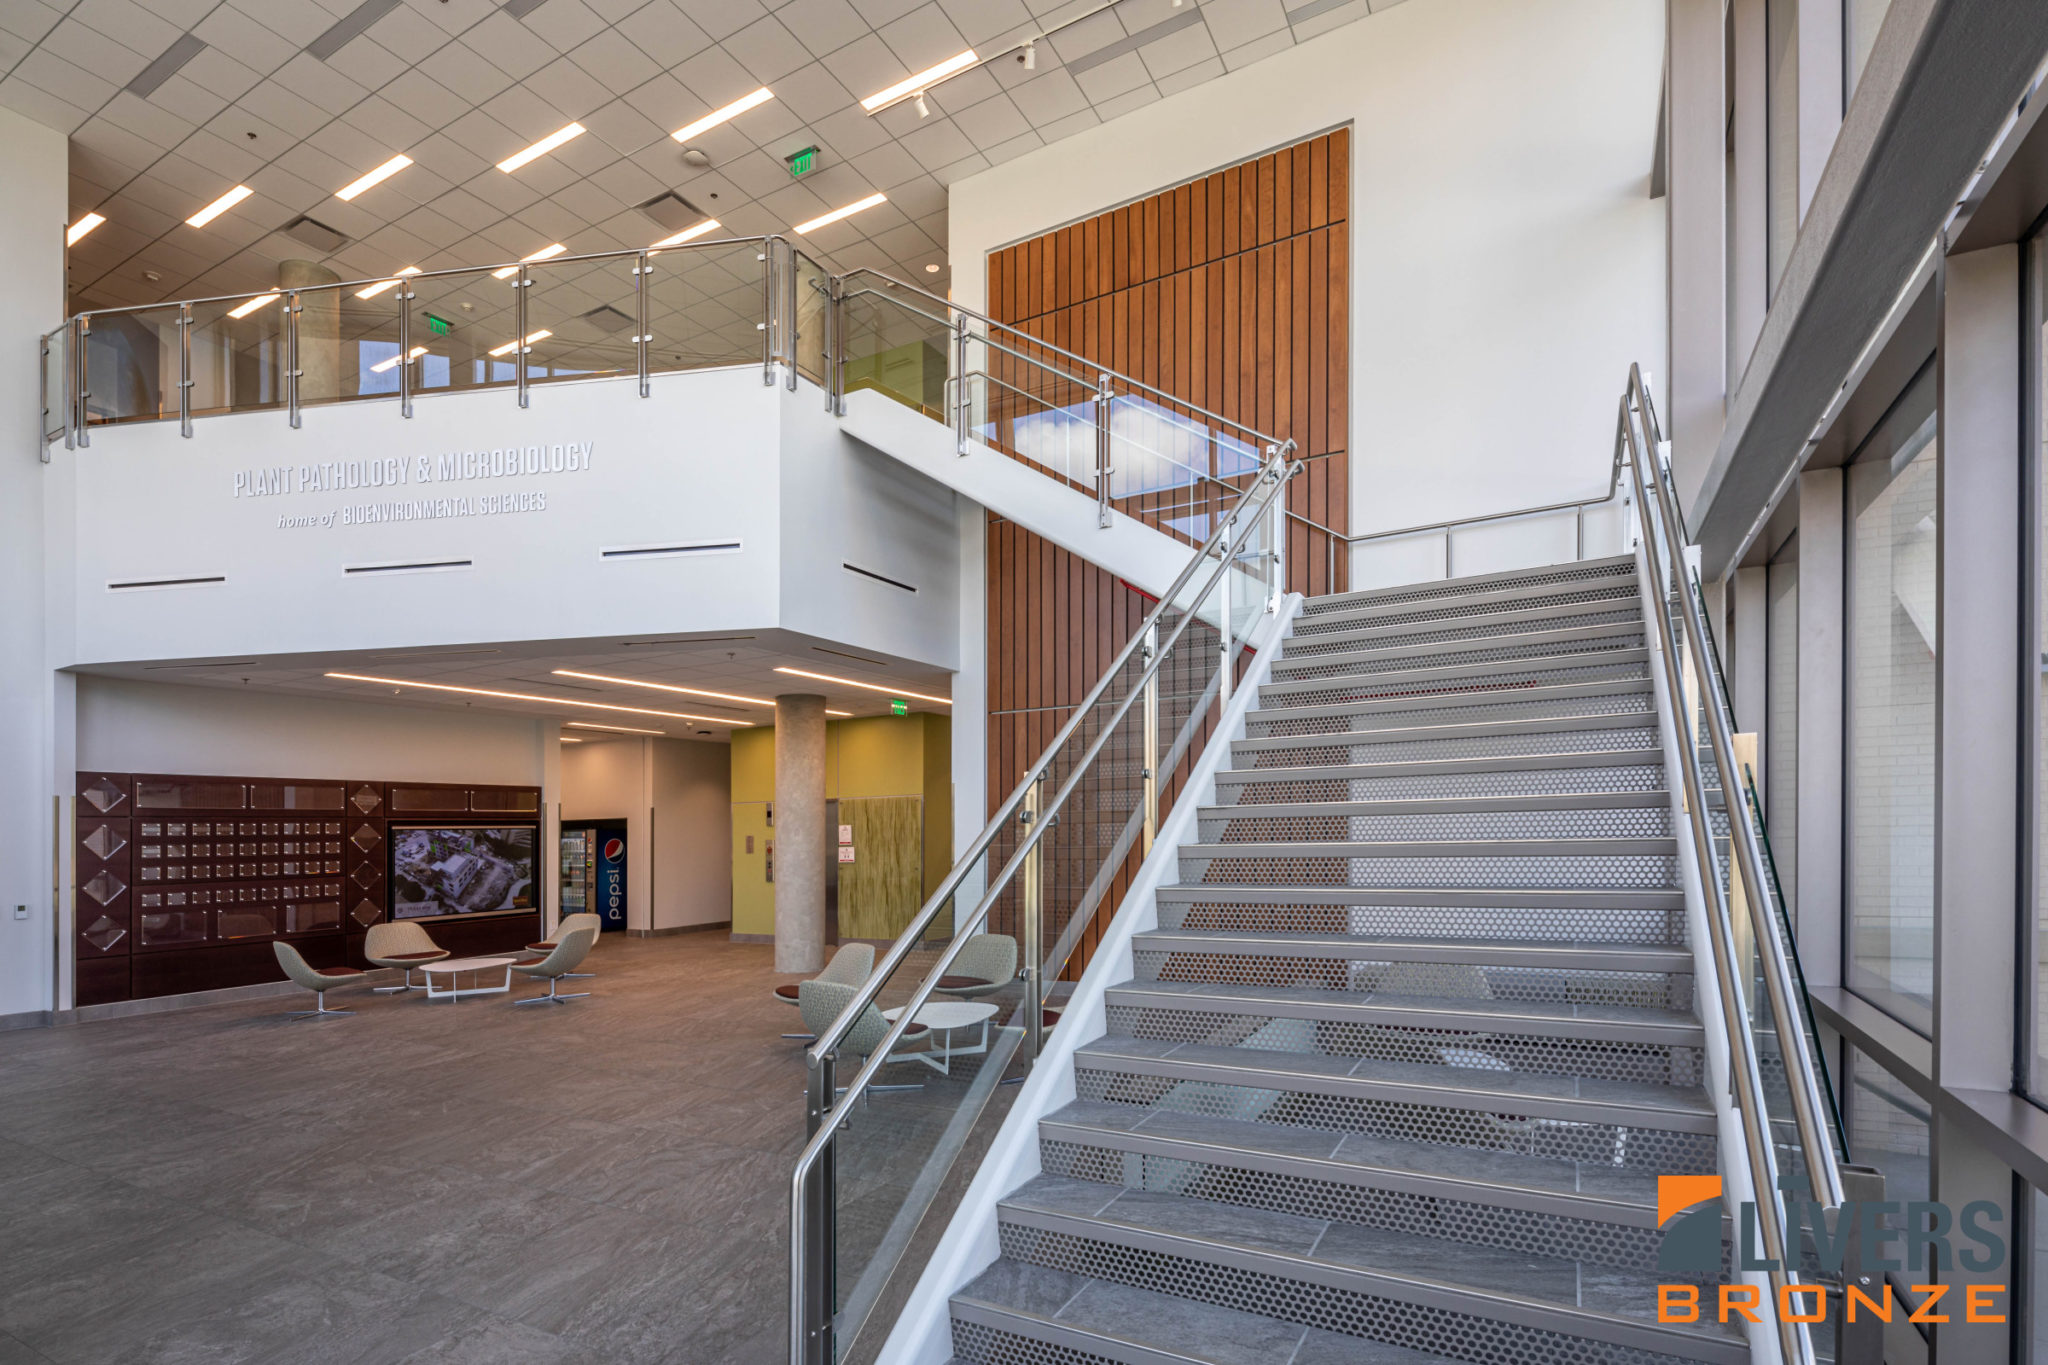 Livers Bronze Icon Glass Railings with laminated glass and Stainless Steel Railings were installed at the Lobby Stairs and Interior Balcony at the Student Library at Texas A&M University's Plant Pathology and Microbiology Building and were made in the USA.